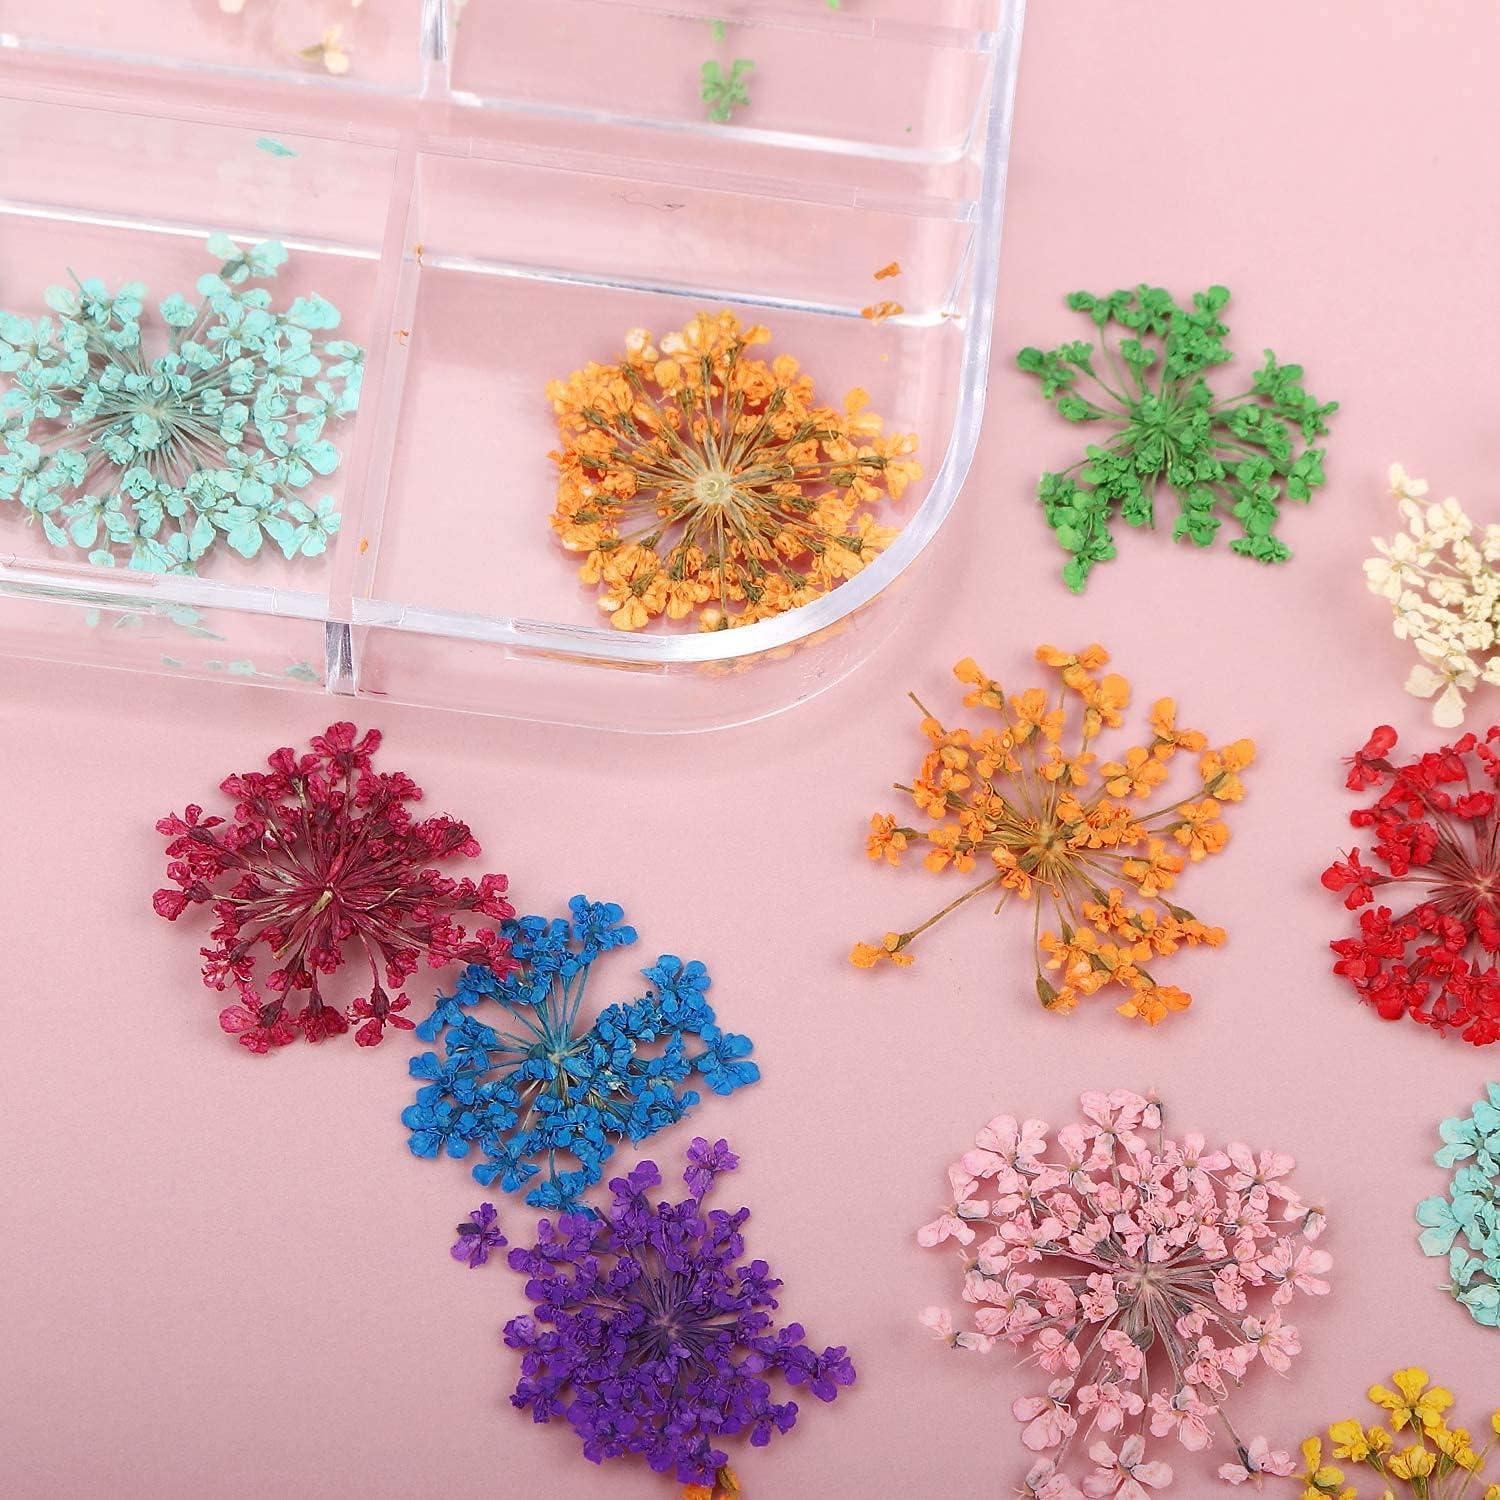 LPOne 60 pcs 3D Nails Dried Flowers Resin Accessories Mini Natural for Nail  Art Supplies Decal Mixed Accessory Starry Flower Stickers Colorful Dry  Decals(12 Colors). 2.8 x 0.75 0.67 inches